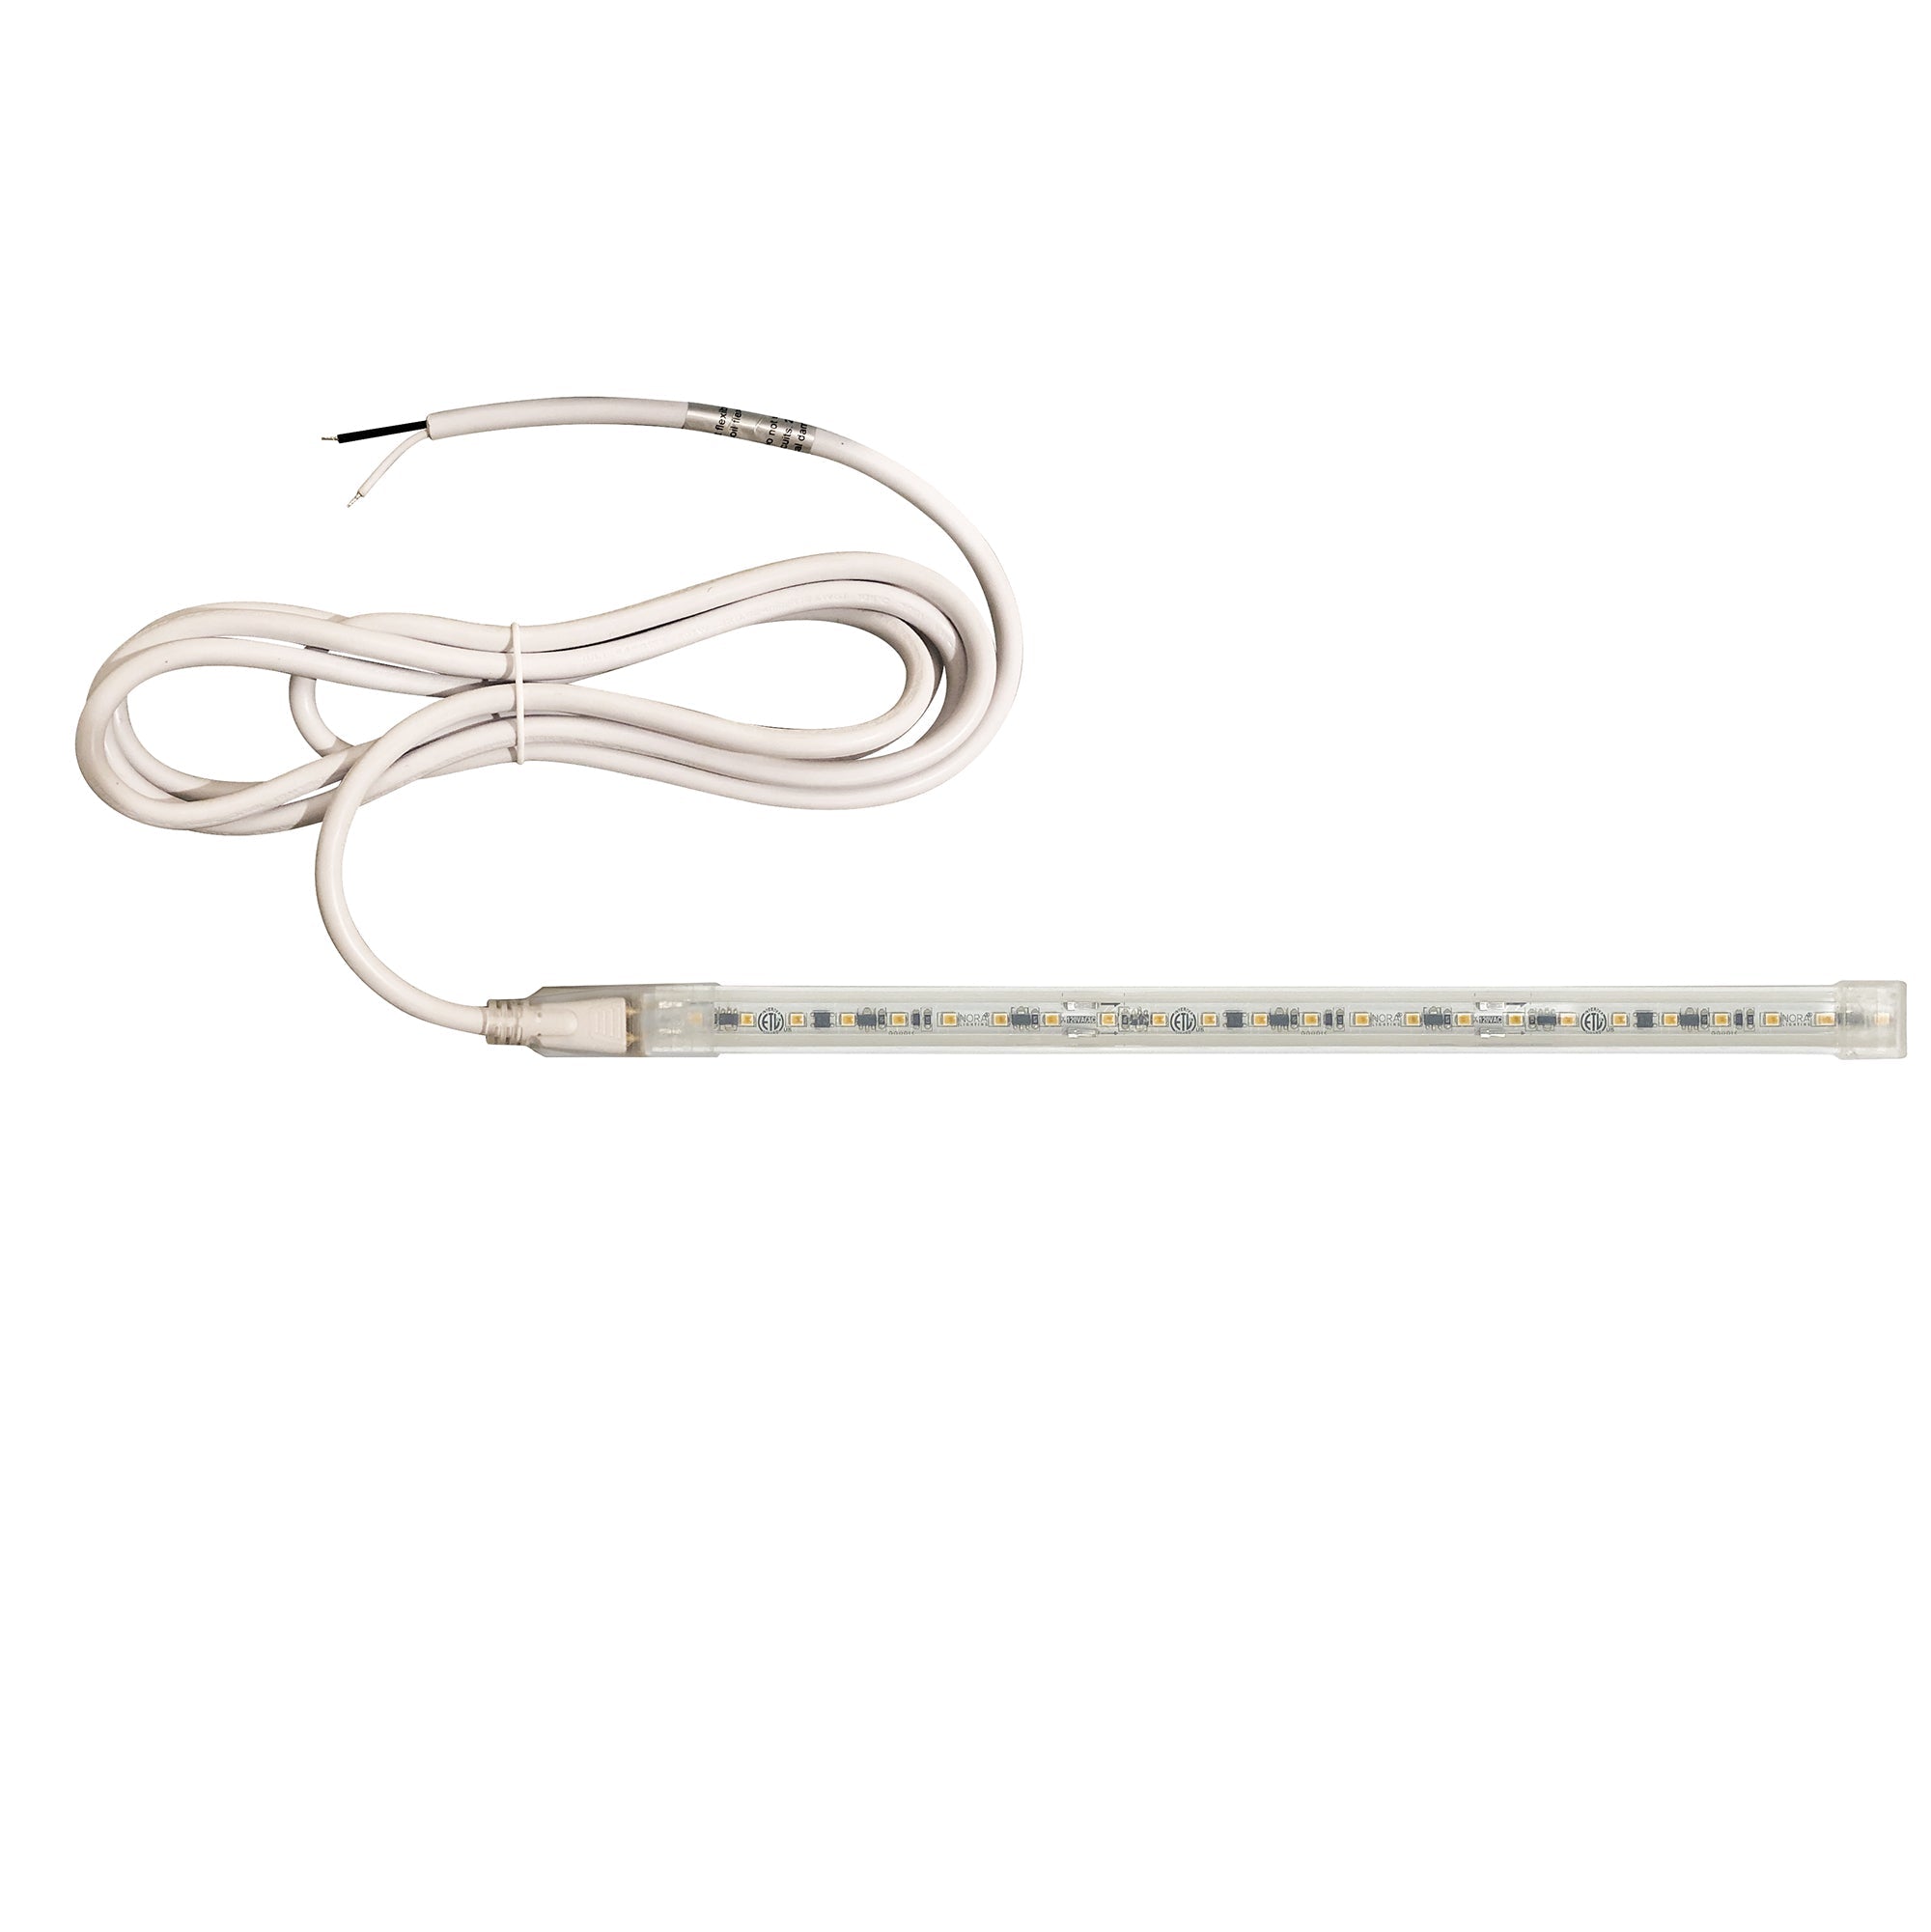 Nora Lighting NUTP13-W90-8-12-930/HW - Accent / Undercabinet - Custom Cut 90-ft, 8-in 120V Continuous LED Tape Light, 330lm / 3.6W per foot, 3000K, w/ Mounting Clips and 8' Hardwired Power Cord